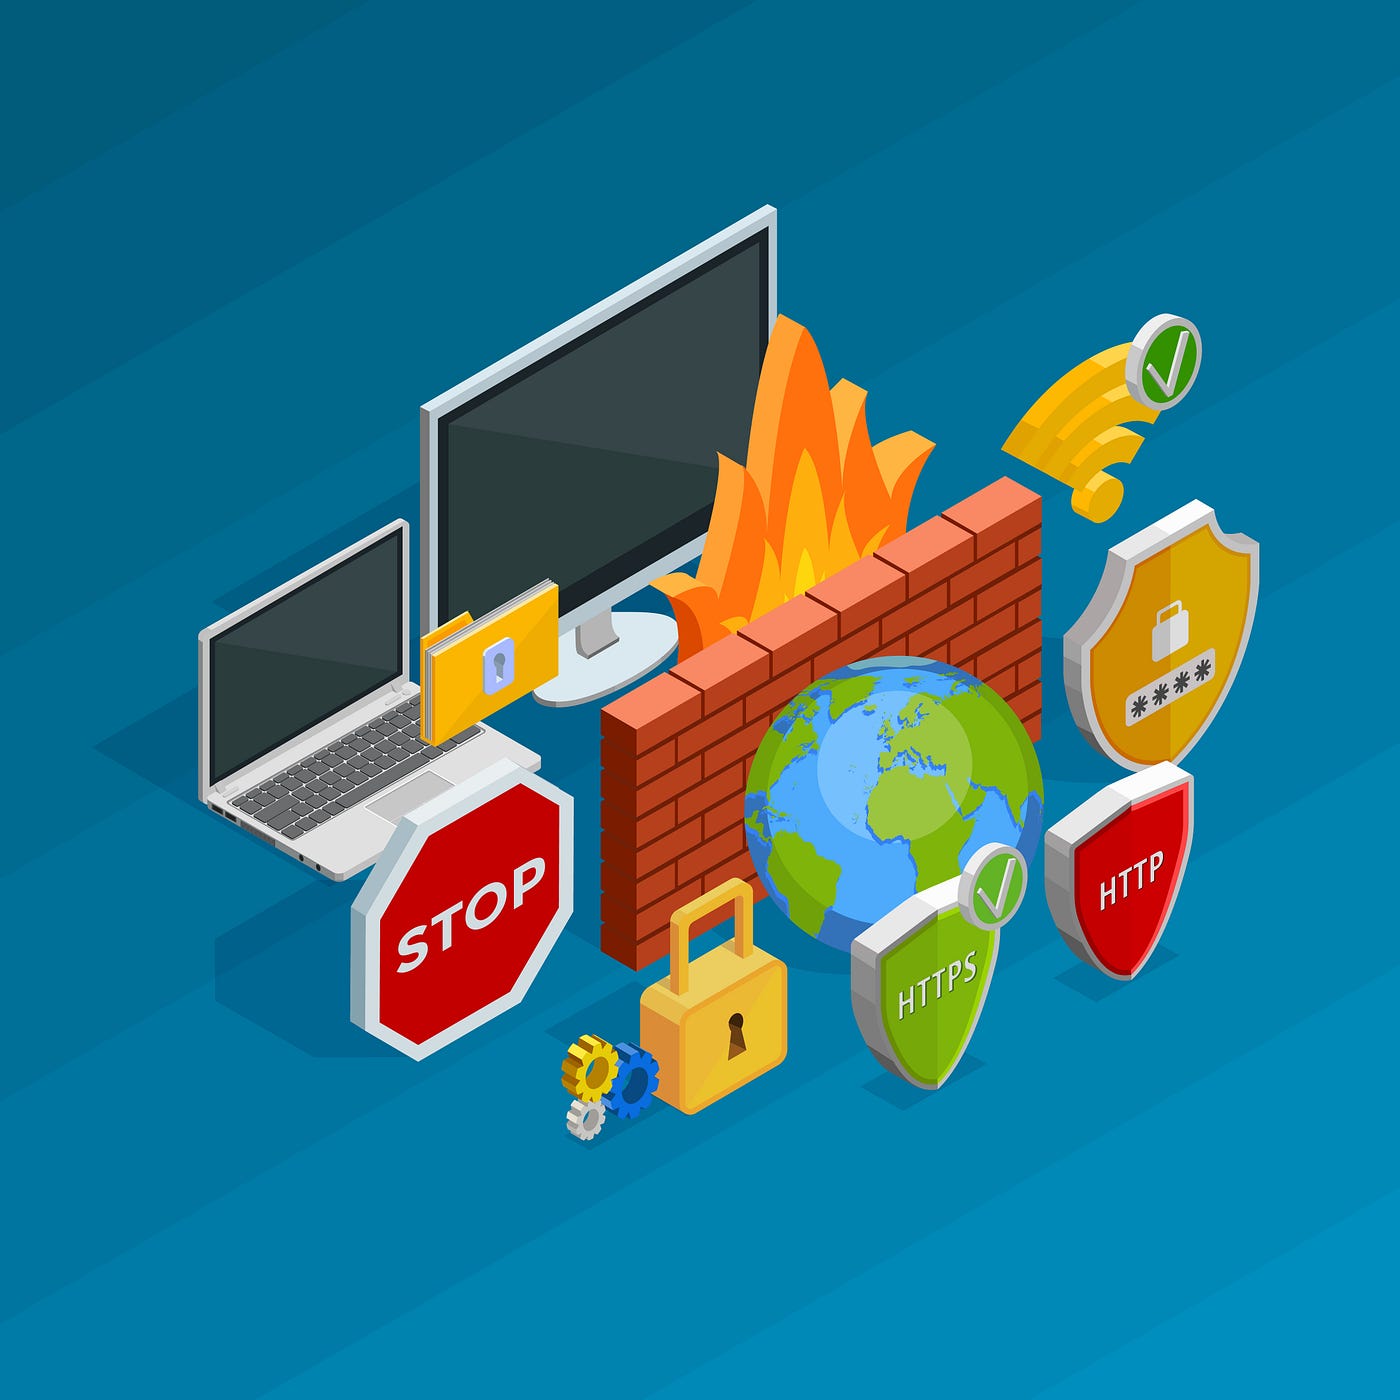 A10 Networks: Product Features - Web Application Firewall (WAF)